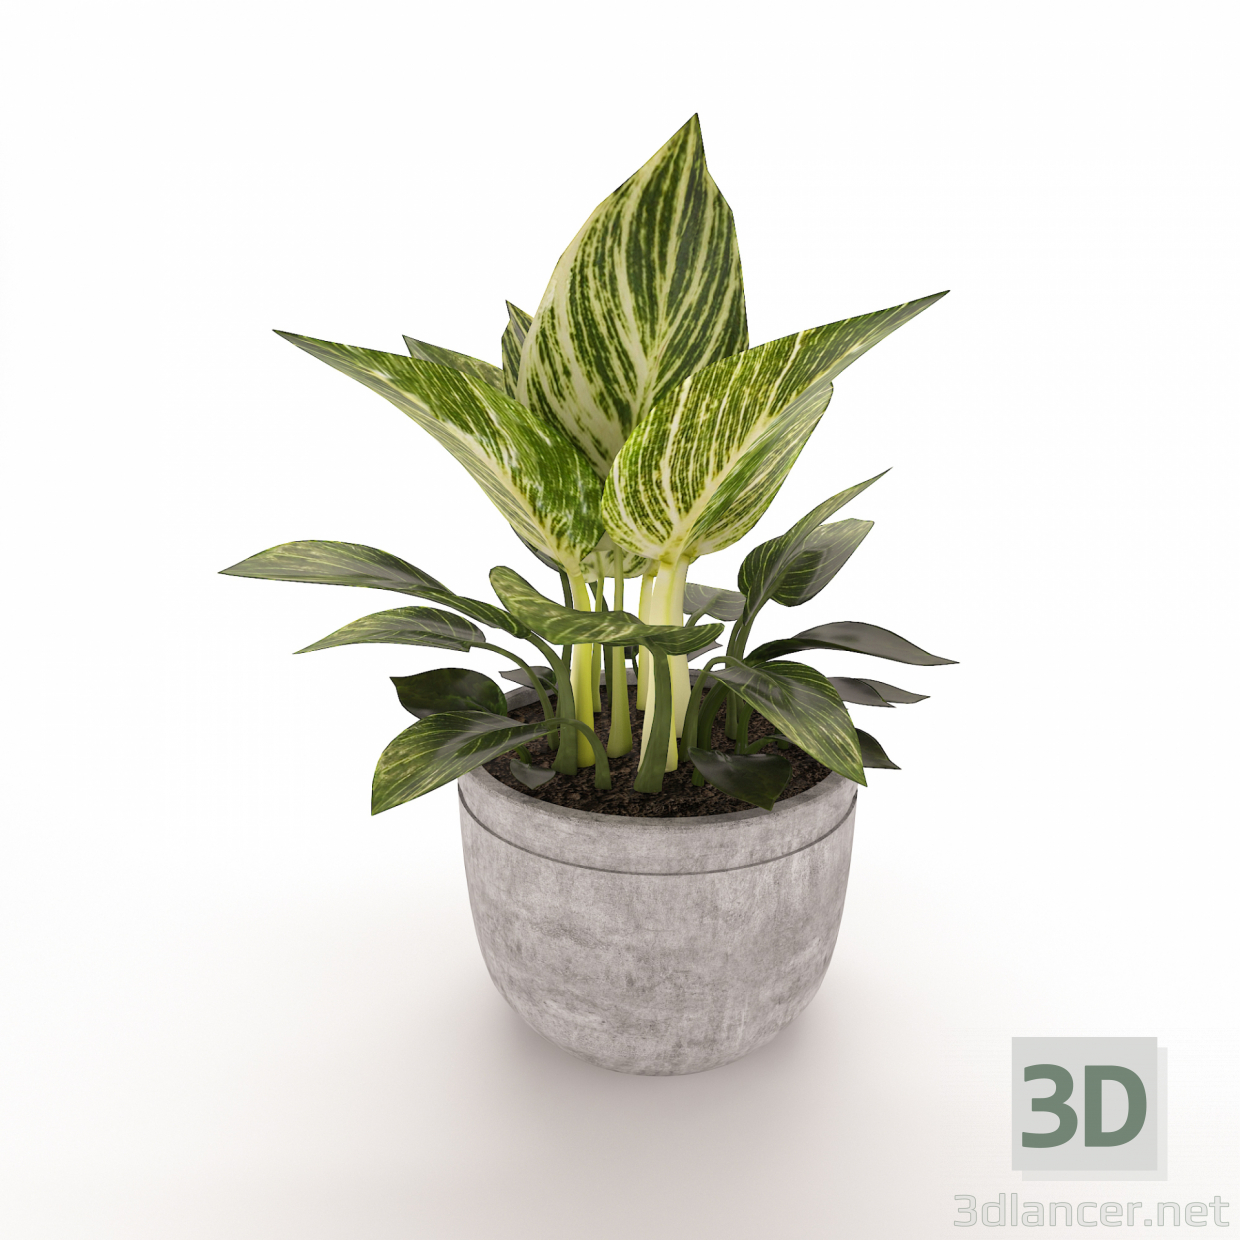 Philodendron 3D-Modell kaufen - Rendern